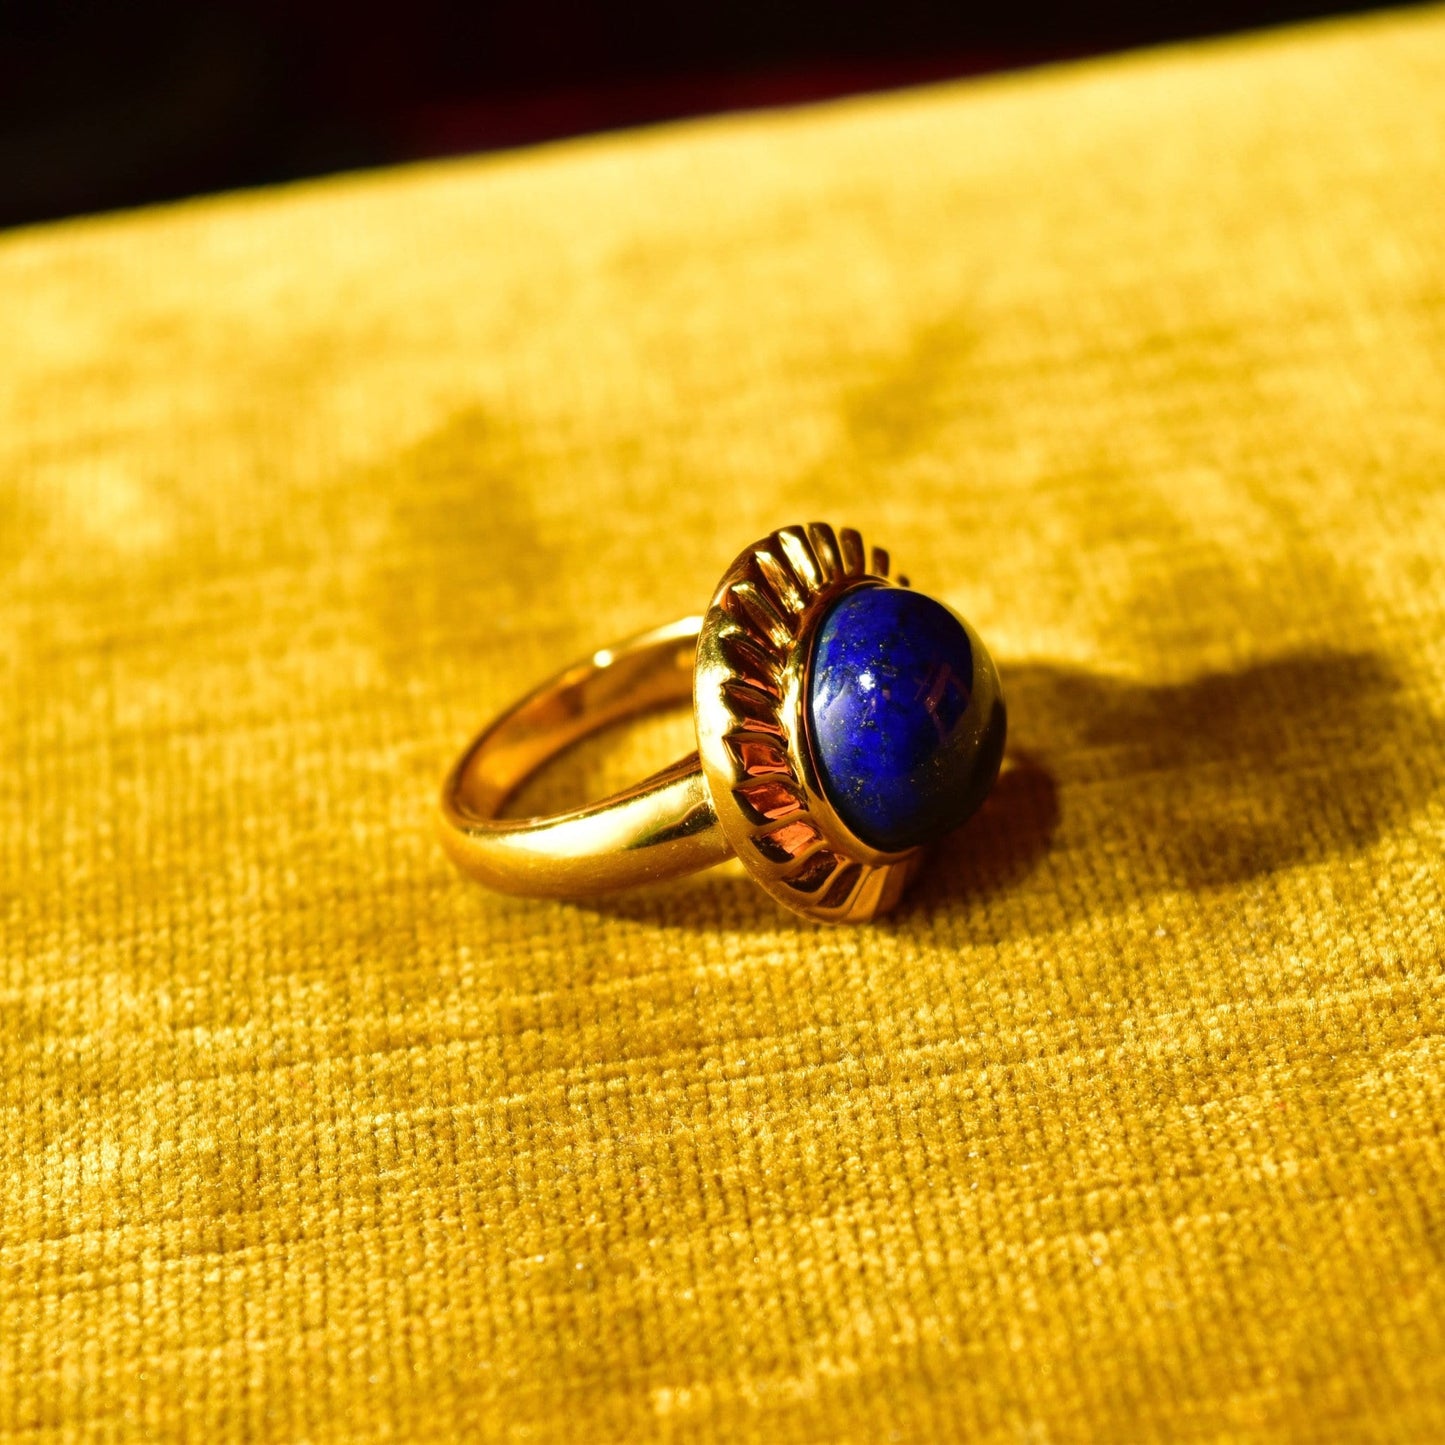 14K yellow gold Lapis Lazuli cocktail ring featuring a cobalt blue cabochon gemstone solitaire, size 7 1/2 US